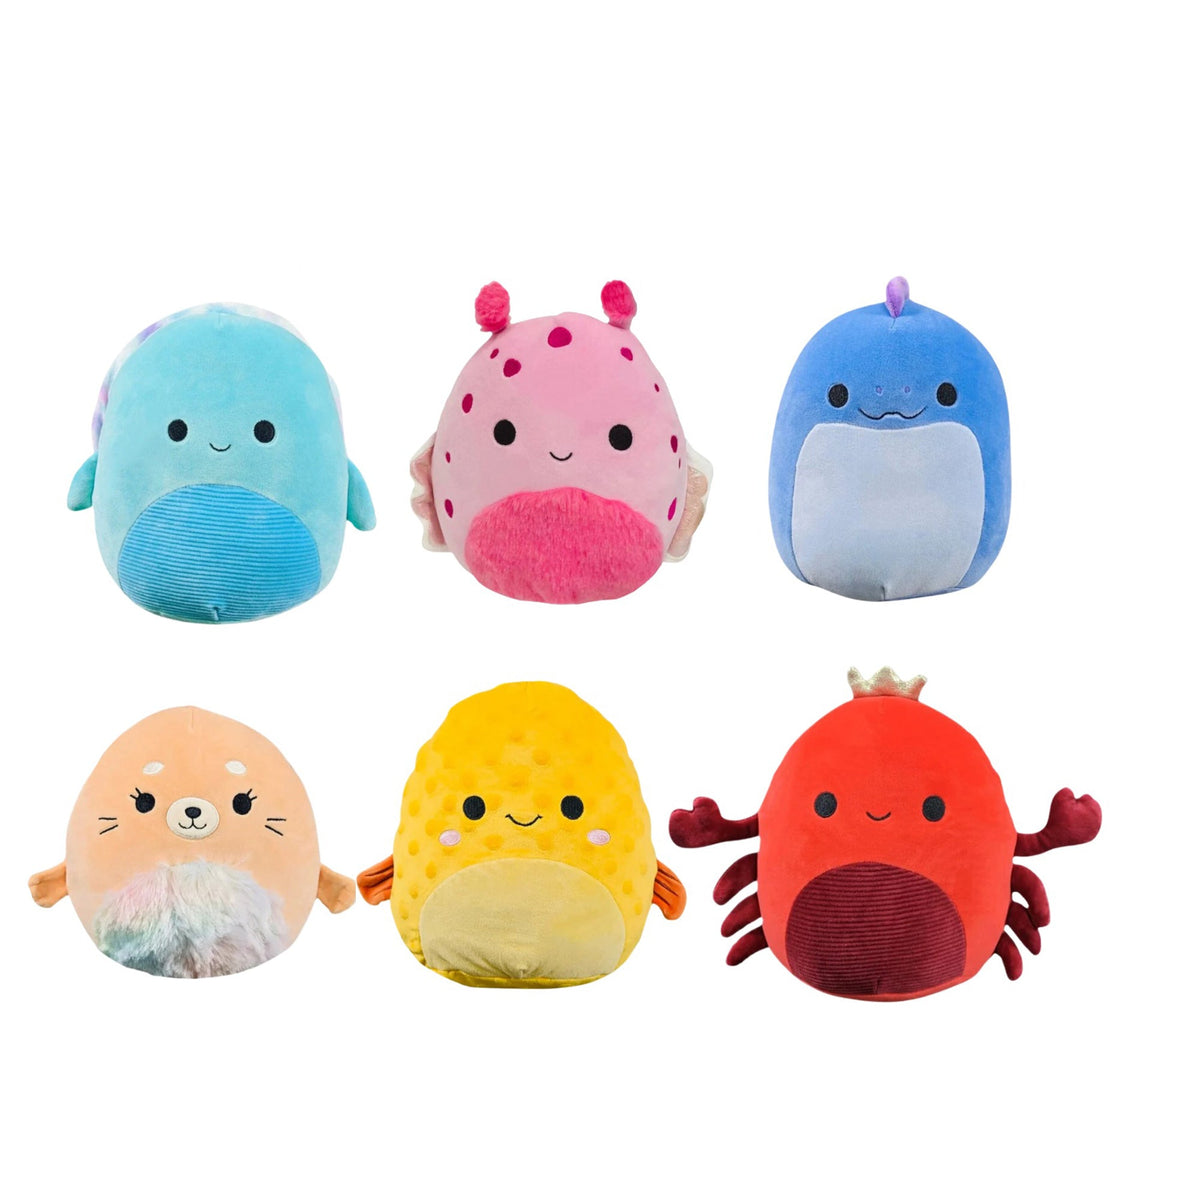 ROYAL SPECIALTY SALES Plushes Deep Sea Squishmallow Plush, 5 Inches, Assortment, 1 Count 196566209916